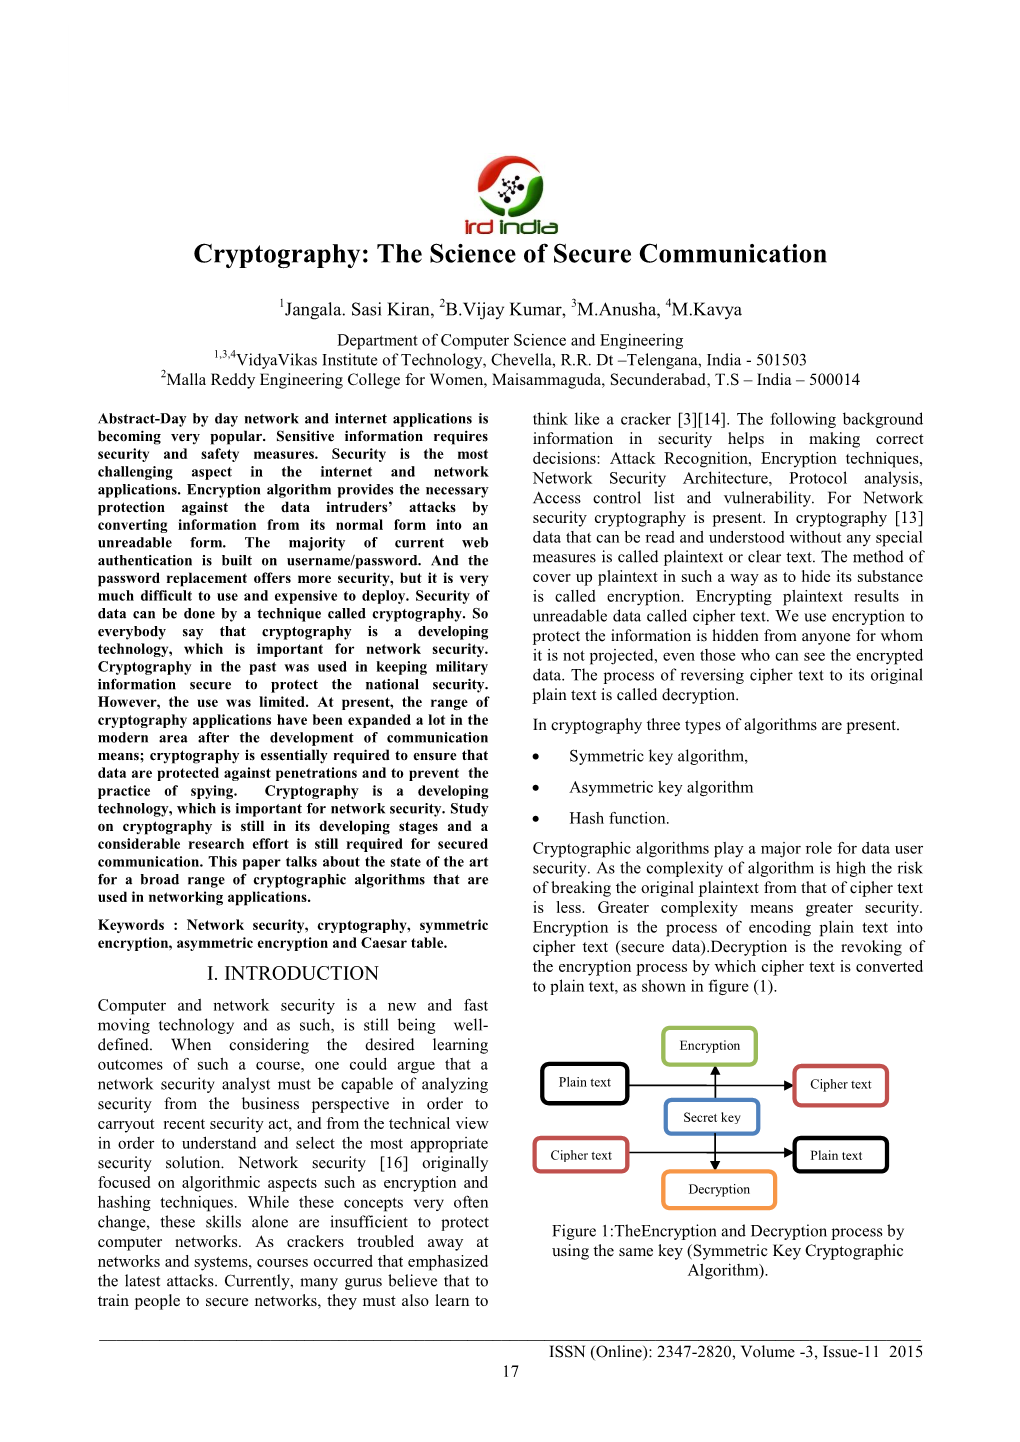 Cryptography: the Science of Secure Communication